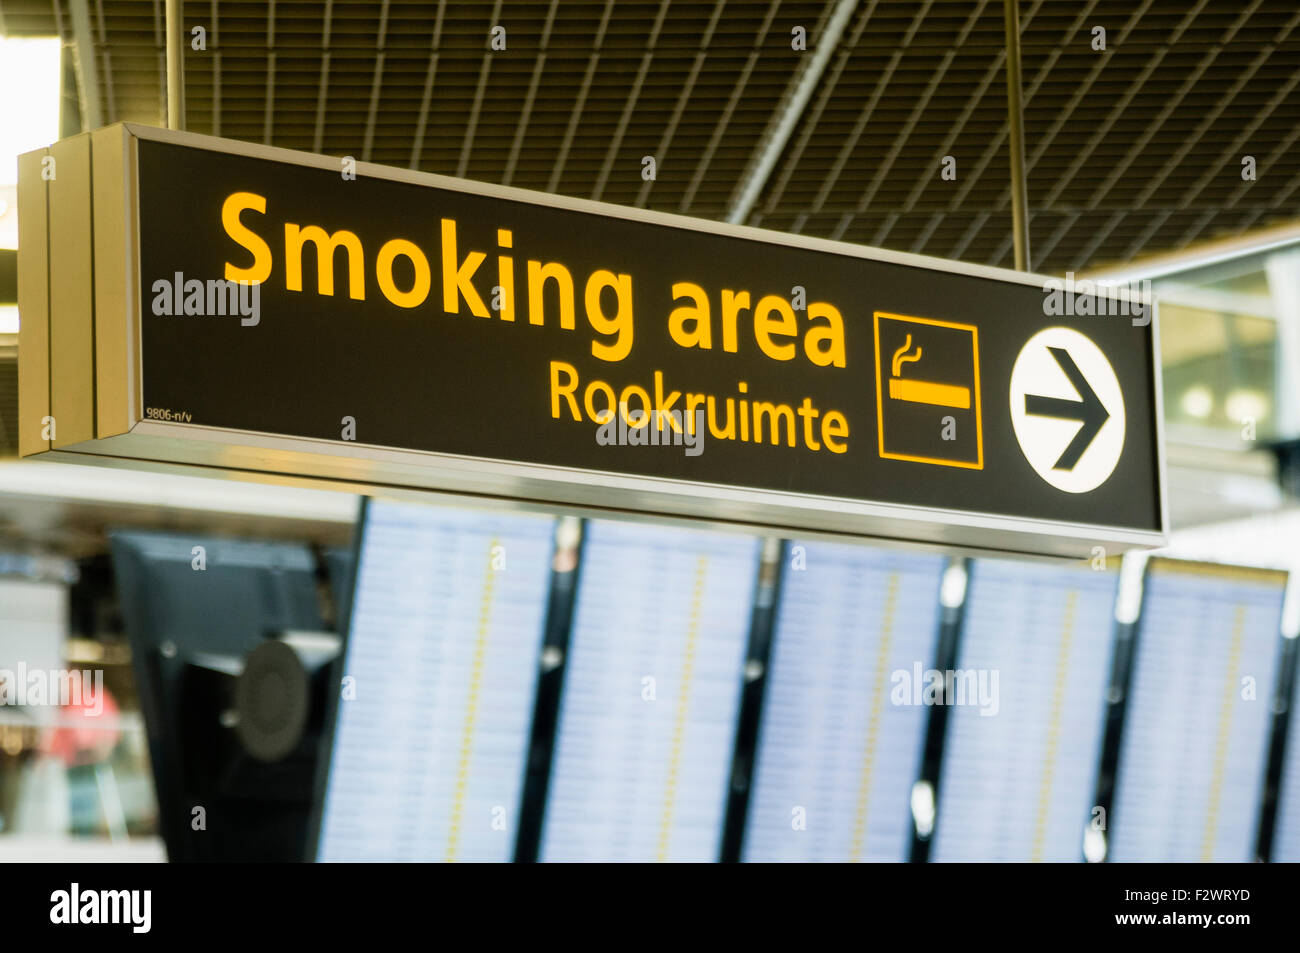 Sign in Schiphol Airport for the smoking area (rookruimte) Stock Photo